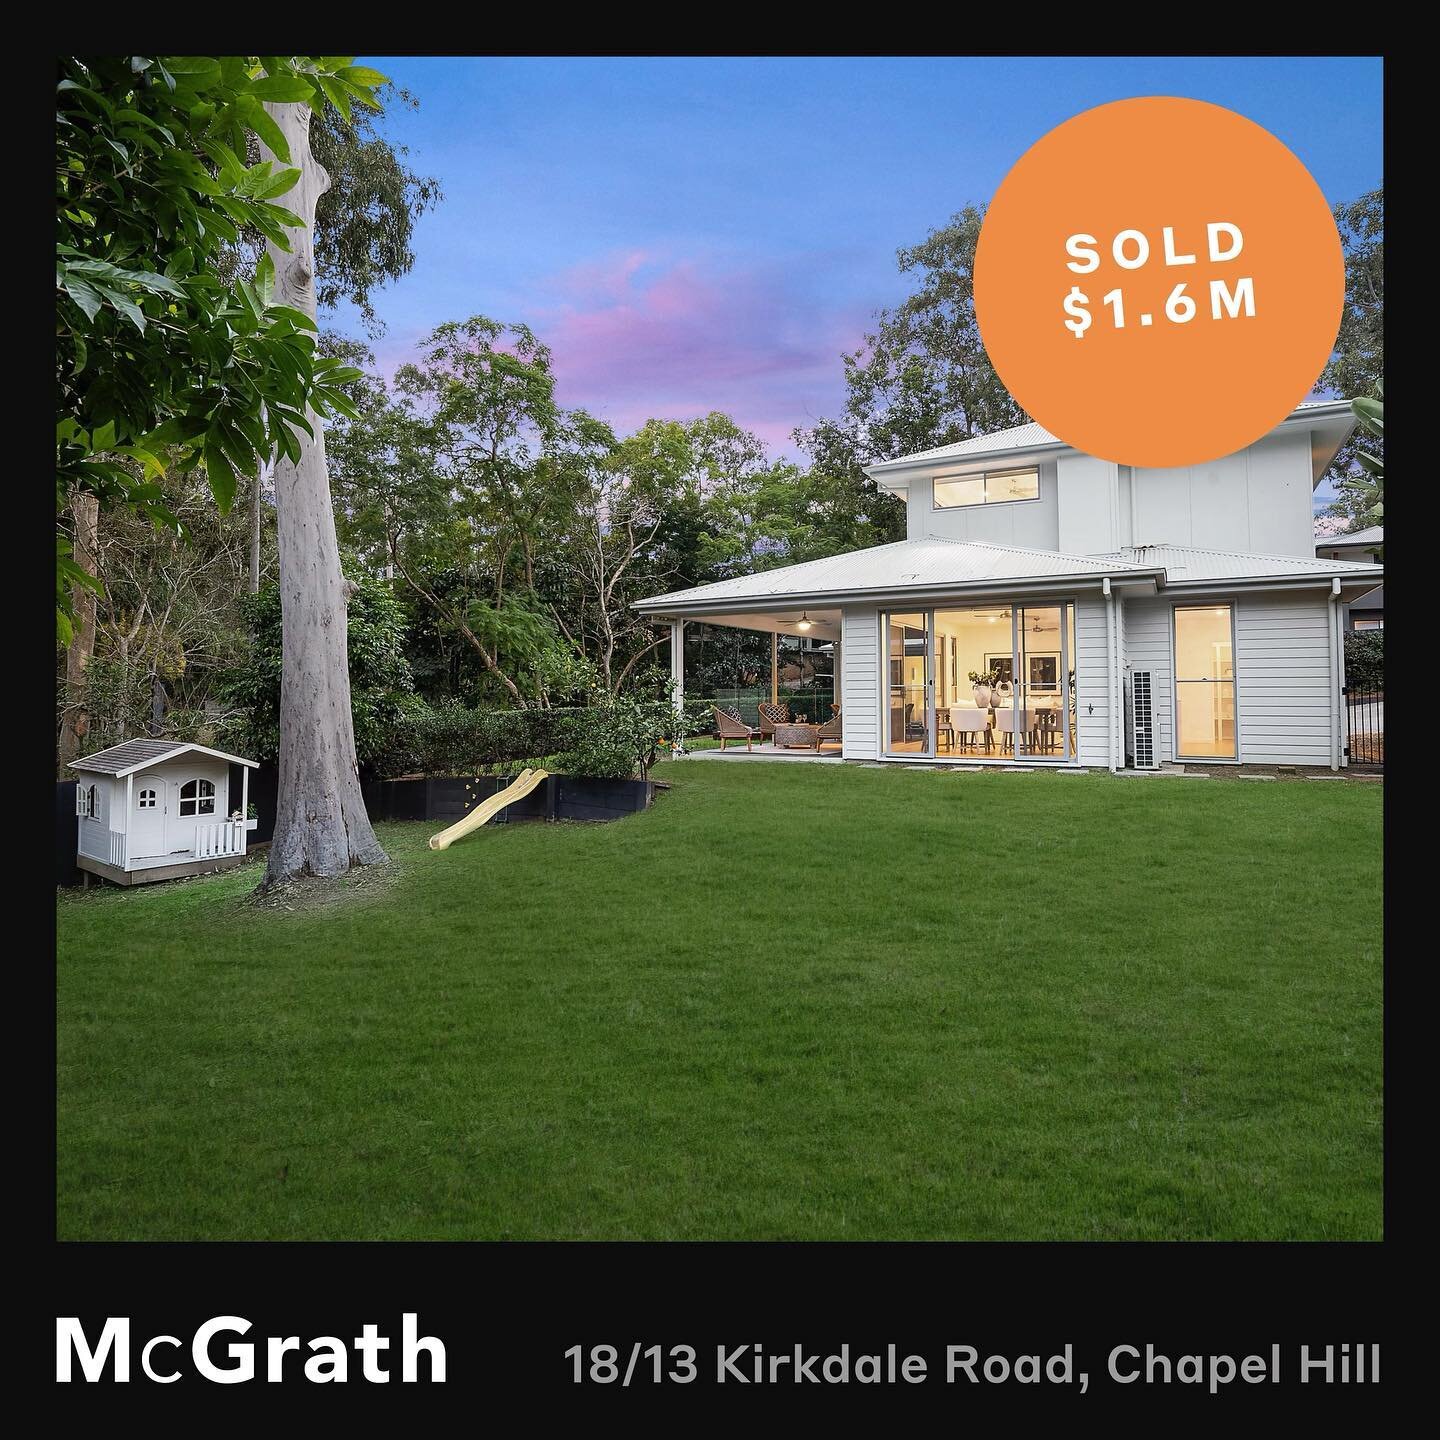 J U S T  S O L D
18/13 Kirkdale Road, Chapel Hill

We launched this beautiful home days into the Brisbane lockdown a few weeks ago, in which time we facilitated over 30 private viewings in 15-minute intervals.

Following another 30+ viewings the foll